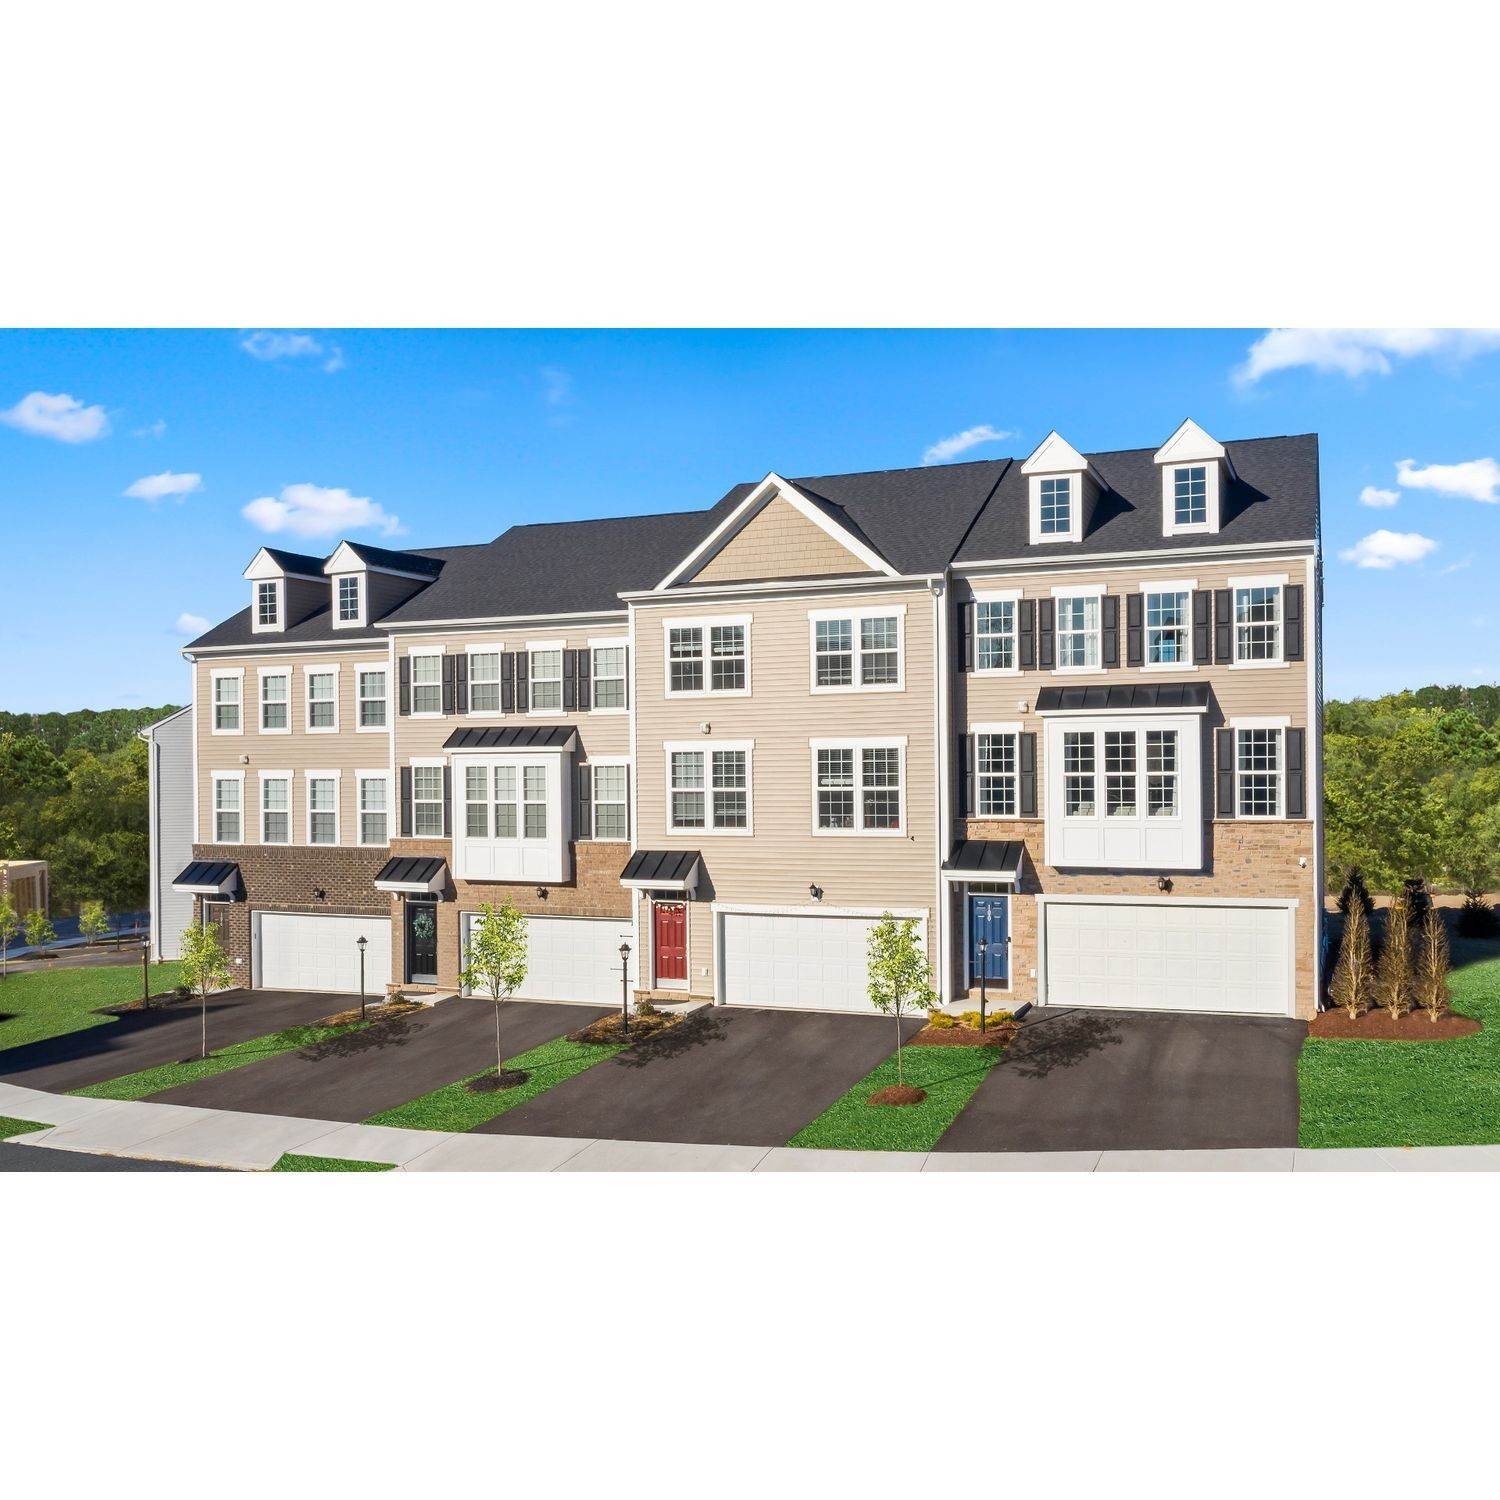 4. Rolling Hills xây dựng tại 100 Sweetwater Drive, Coraopolis, PA 15108